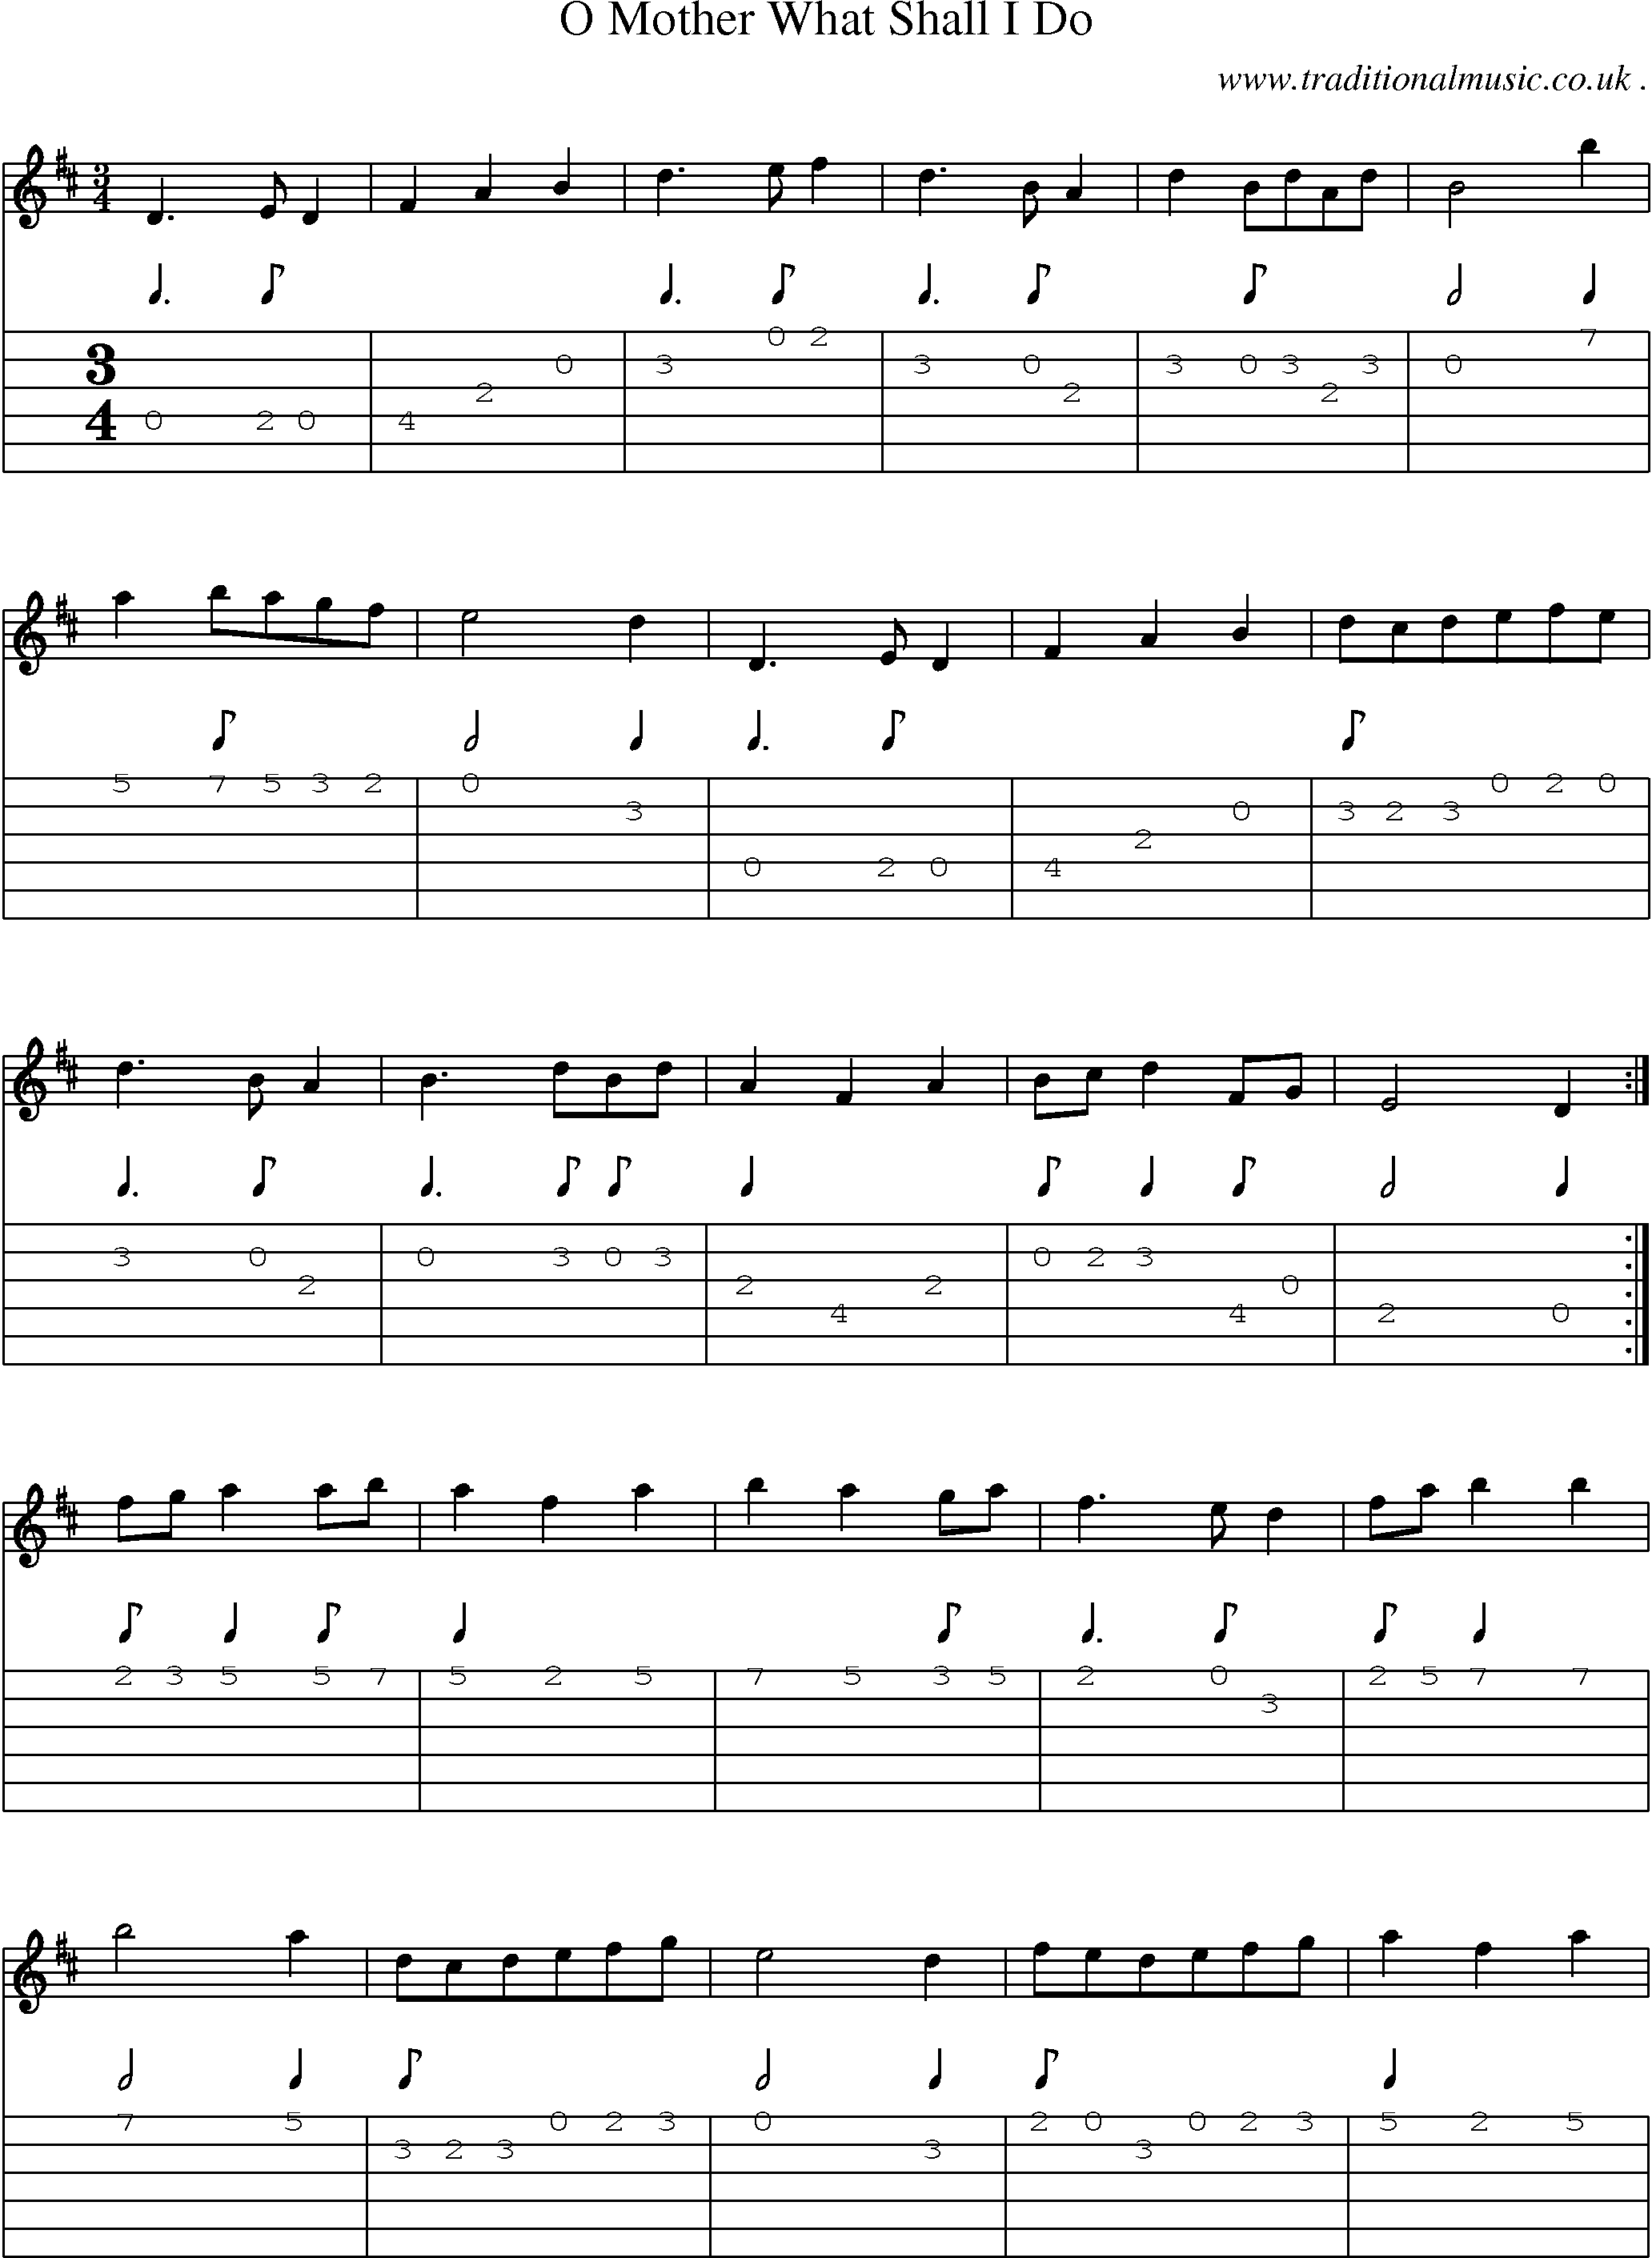 Sheet-music  score, Chords and Guitar Tabs for O Mother What Shall I Do